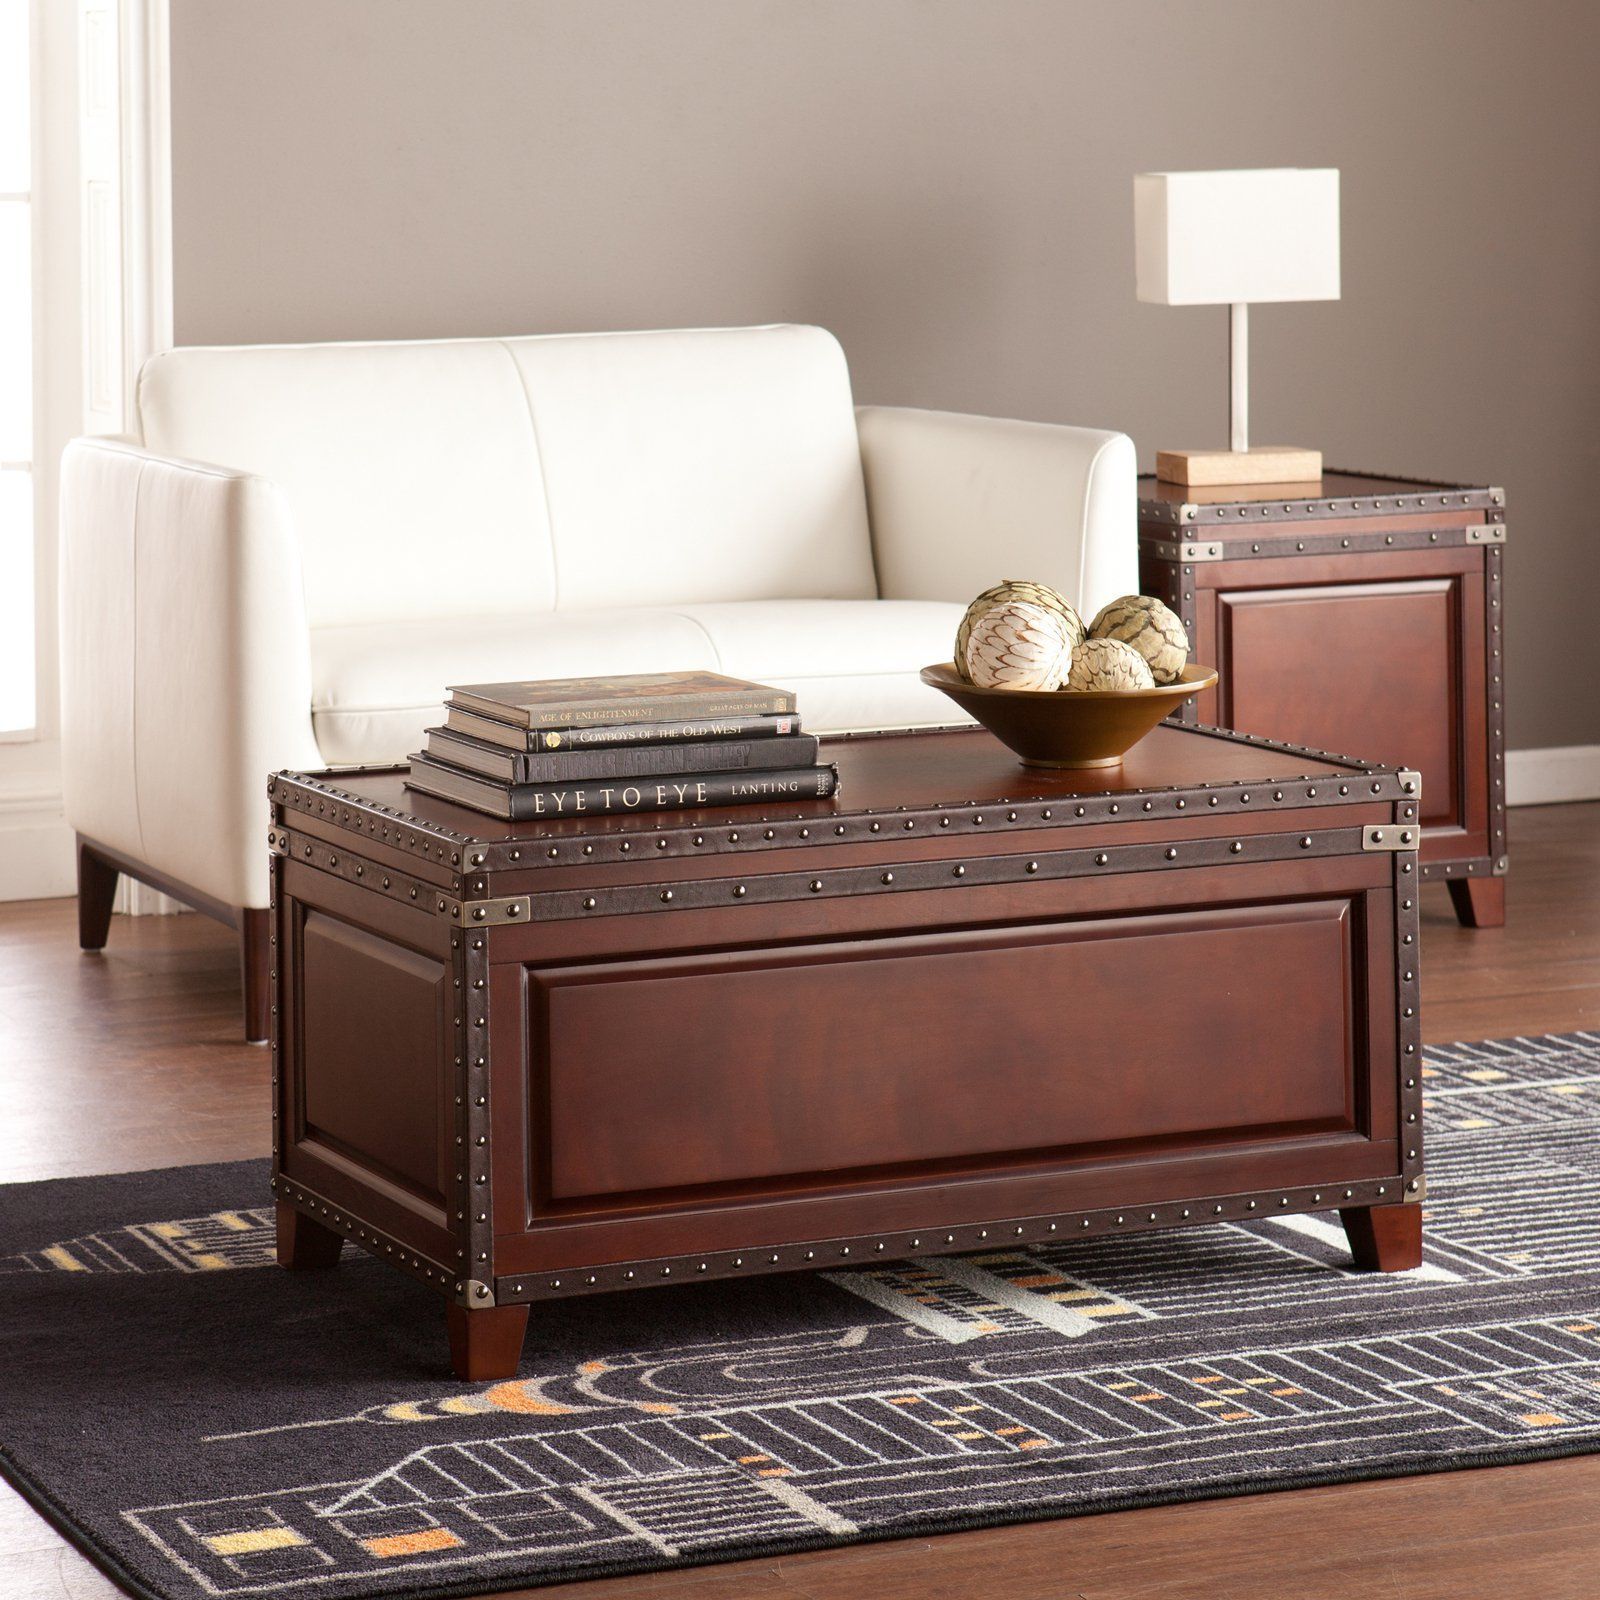 Southern Enterprises Amherst Trunk Coffee Table | From Hayneedle Throughout Southern Enterprises Larksmill Coffee Tables (Gallery 3 of 20)